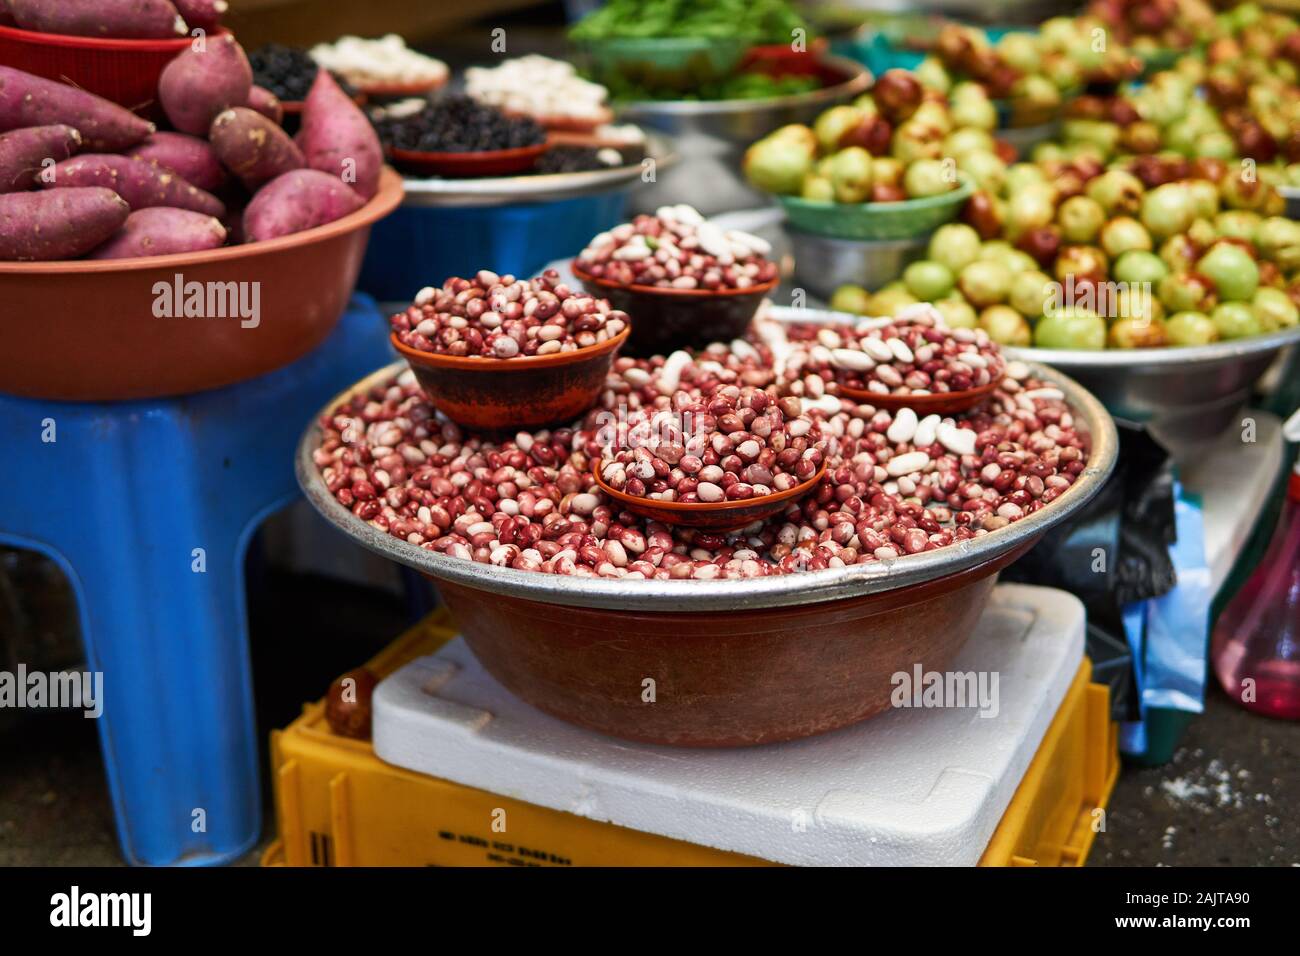 Red and white dried beans, sweet potatoes, jojoba, and other produce for sale at Gwangjang Market in Seoul, South Korea. Stock Photo